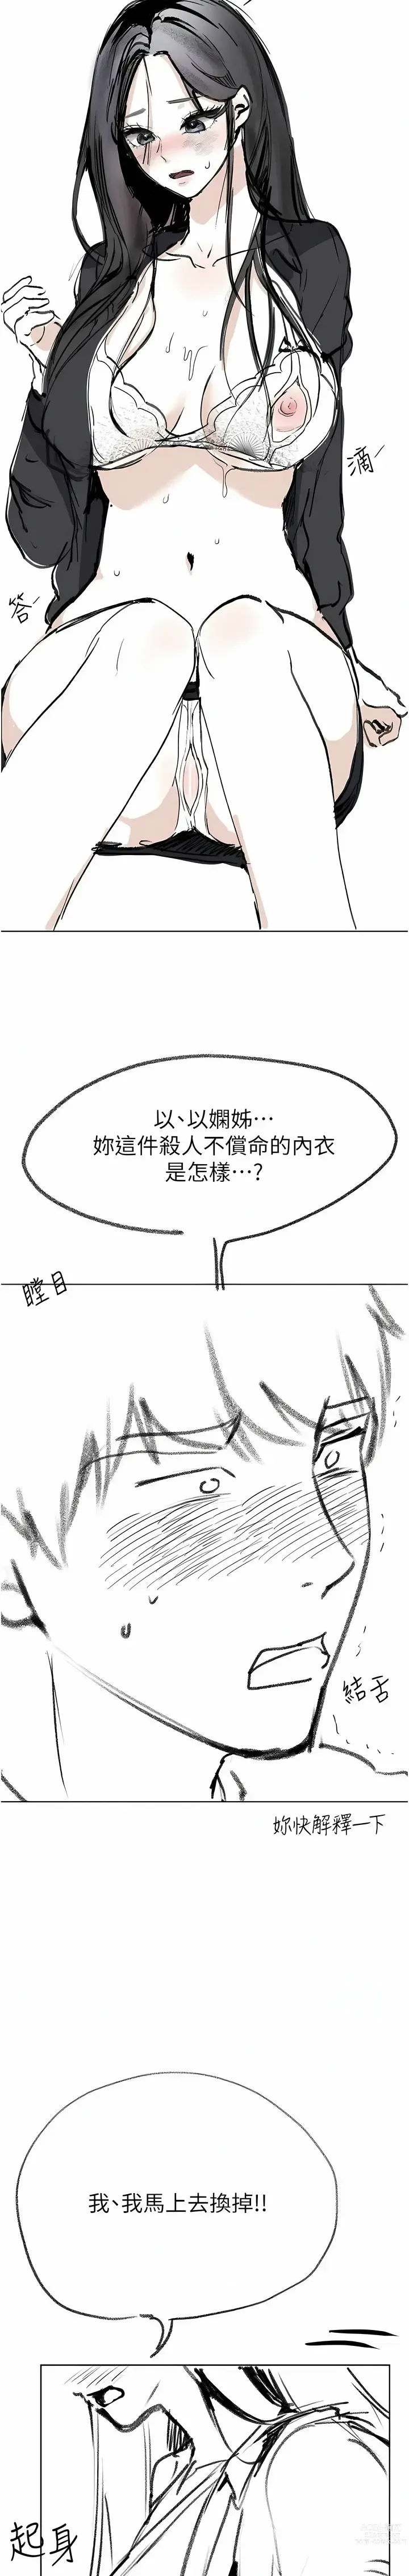 Page 1946 of manga 姐姐们的调教／My Sister’s Friends